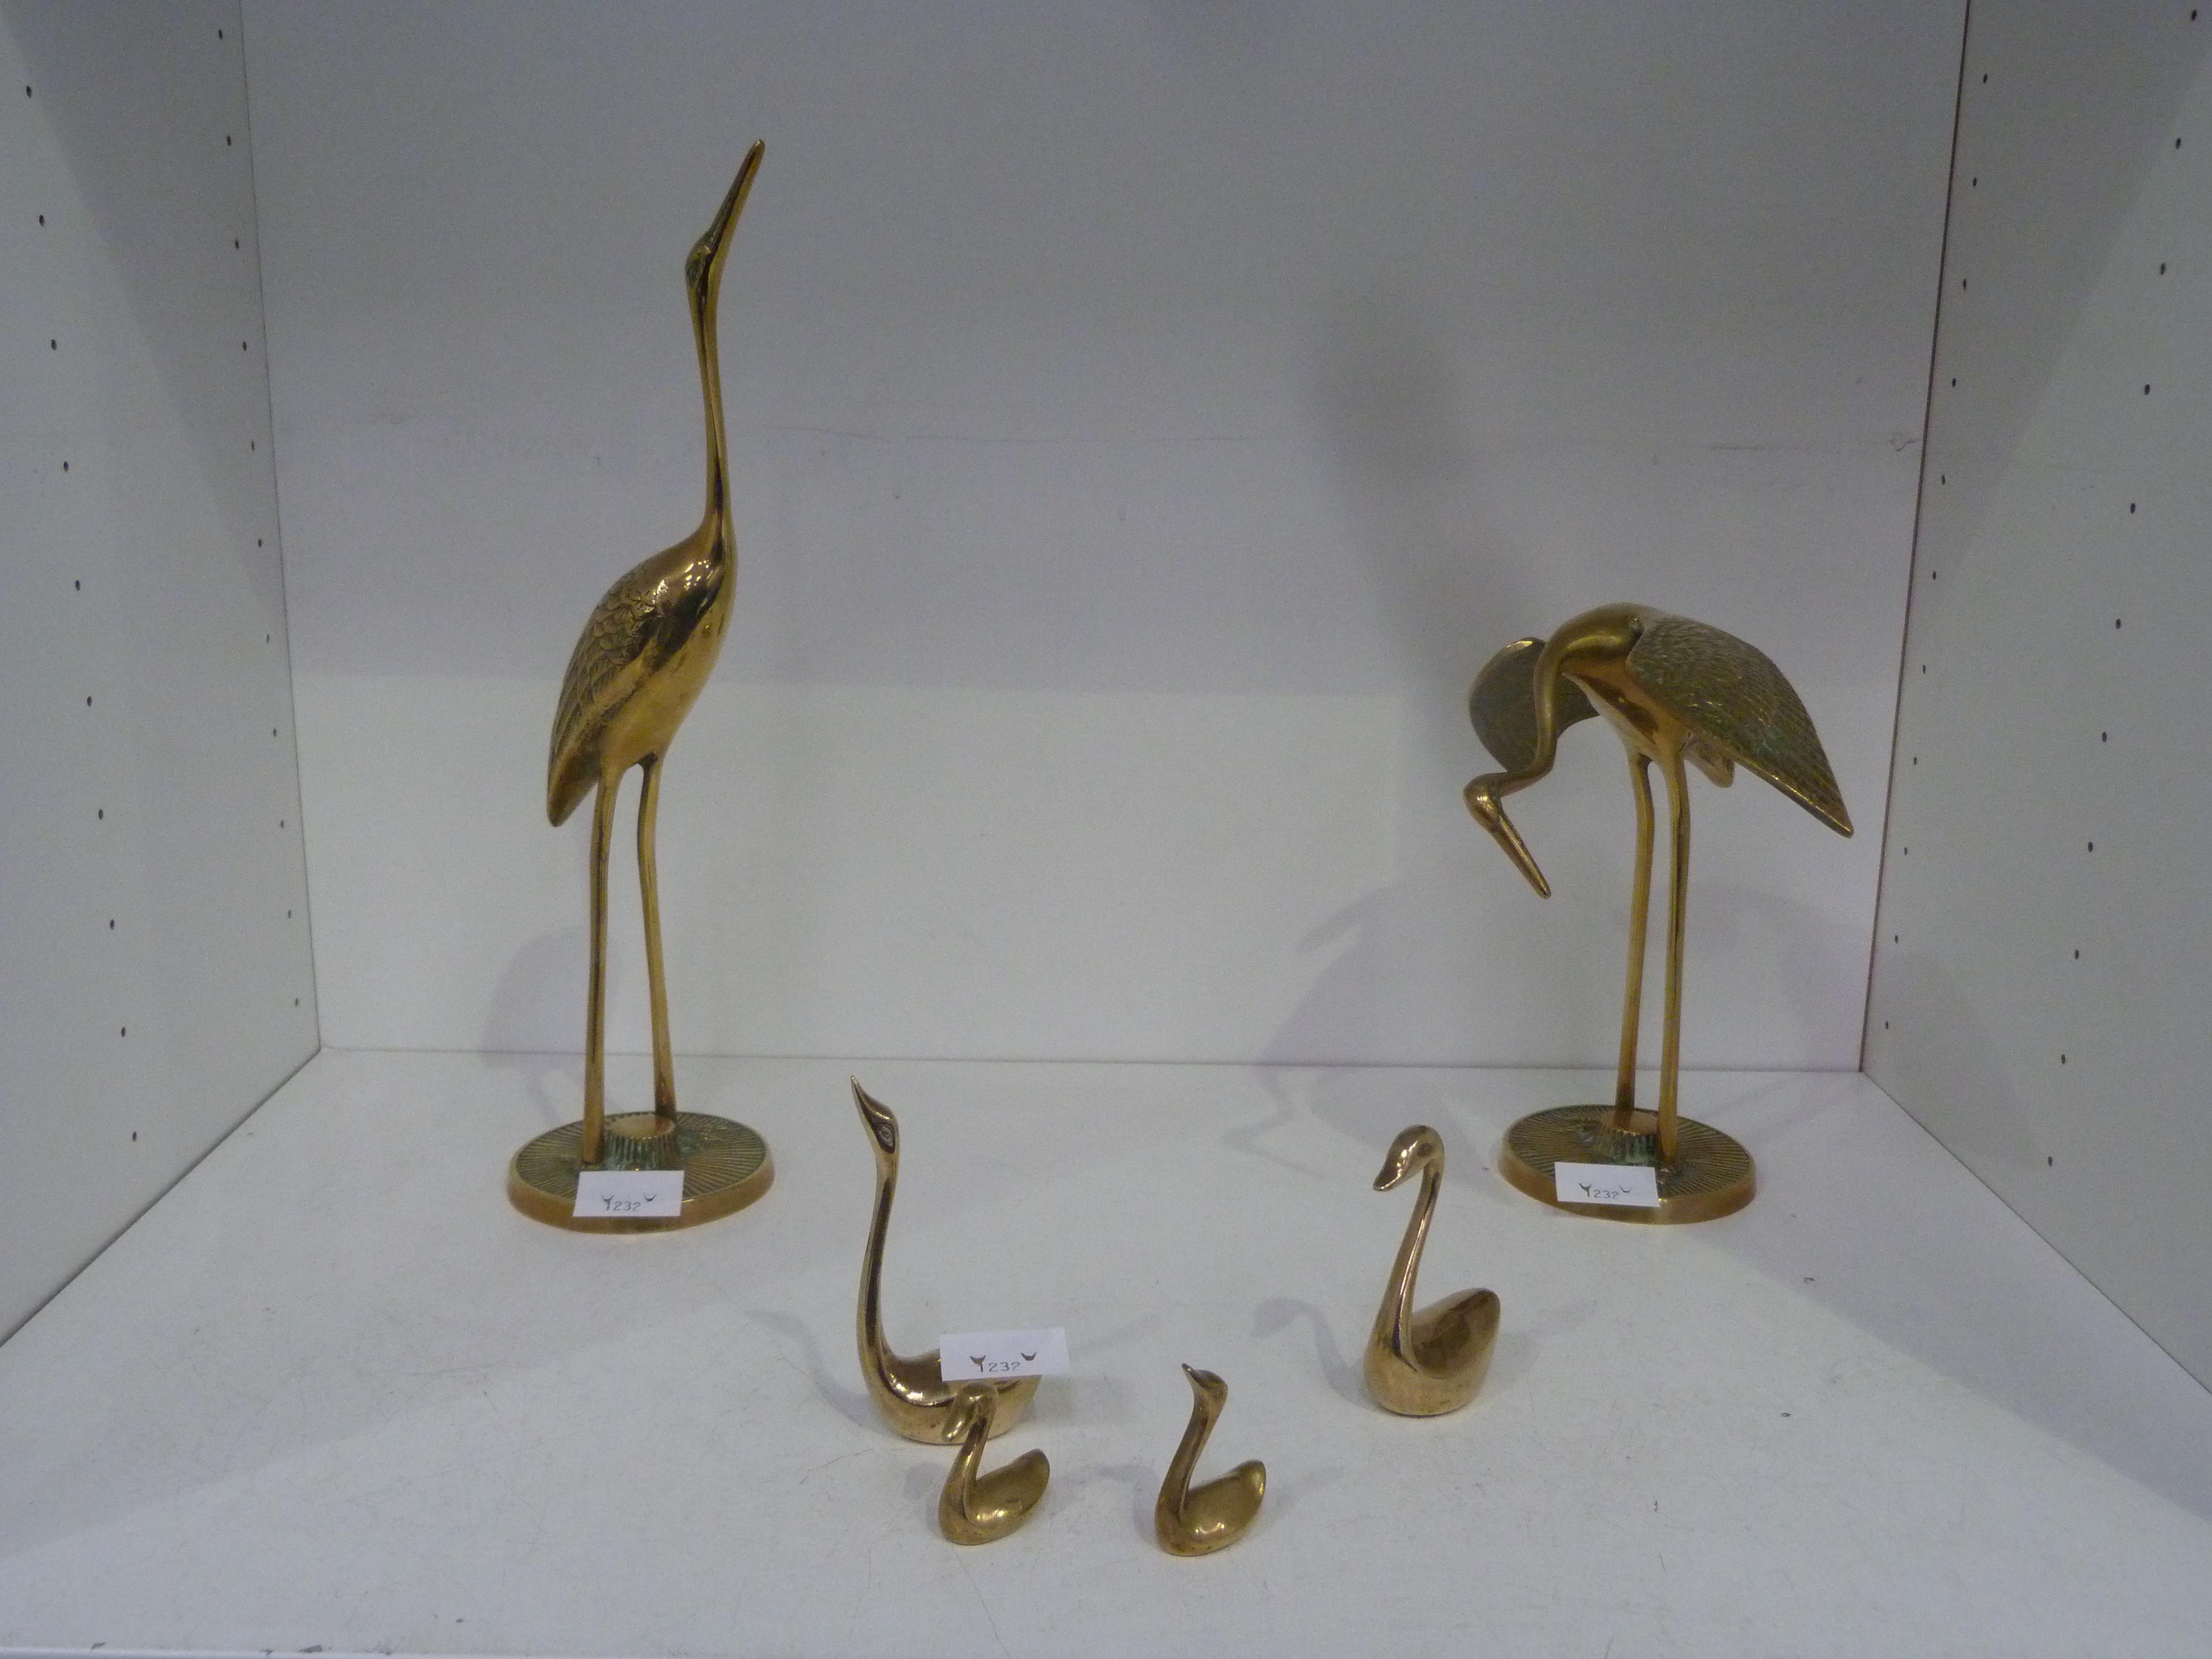 This is a Timed Online Auction on Bidspotter.co.uk, Click here to bid. Two Solid Brass Herons,